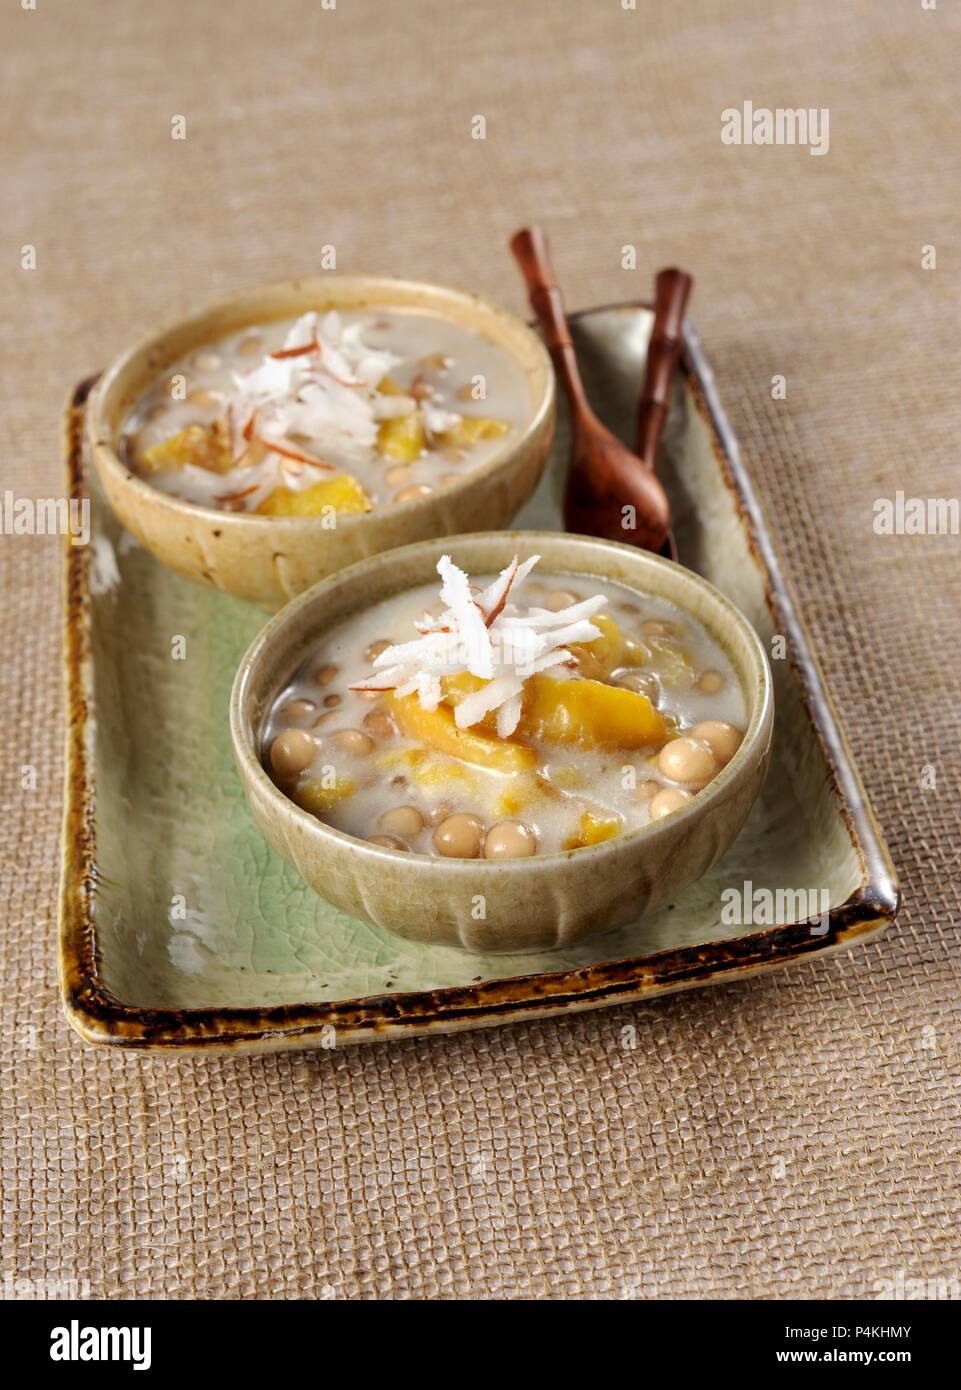 Sago pudding with many bananas and coconut Stock Photo